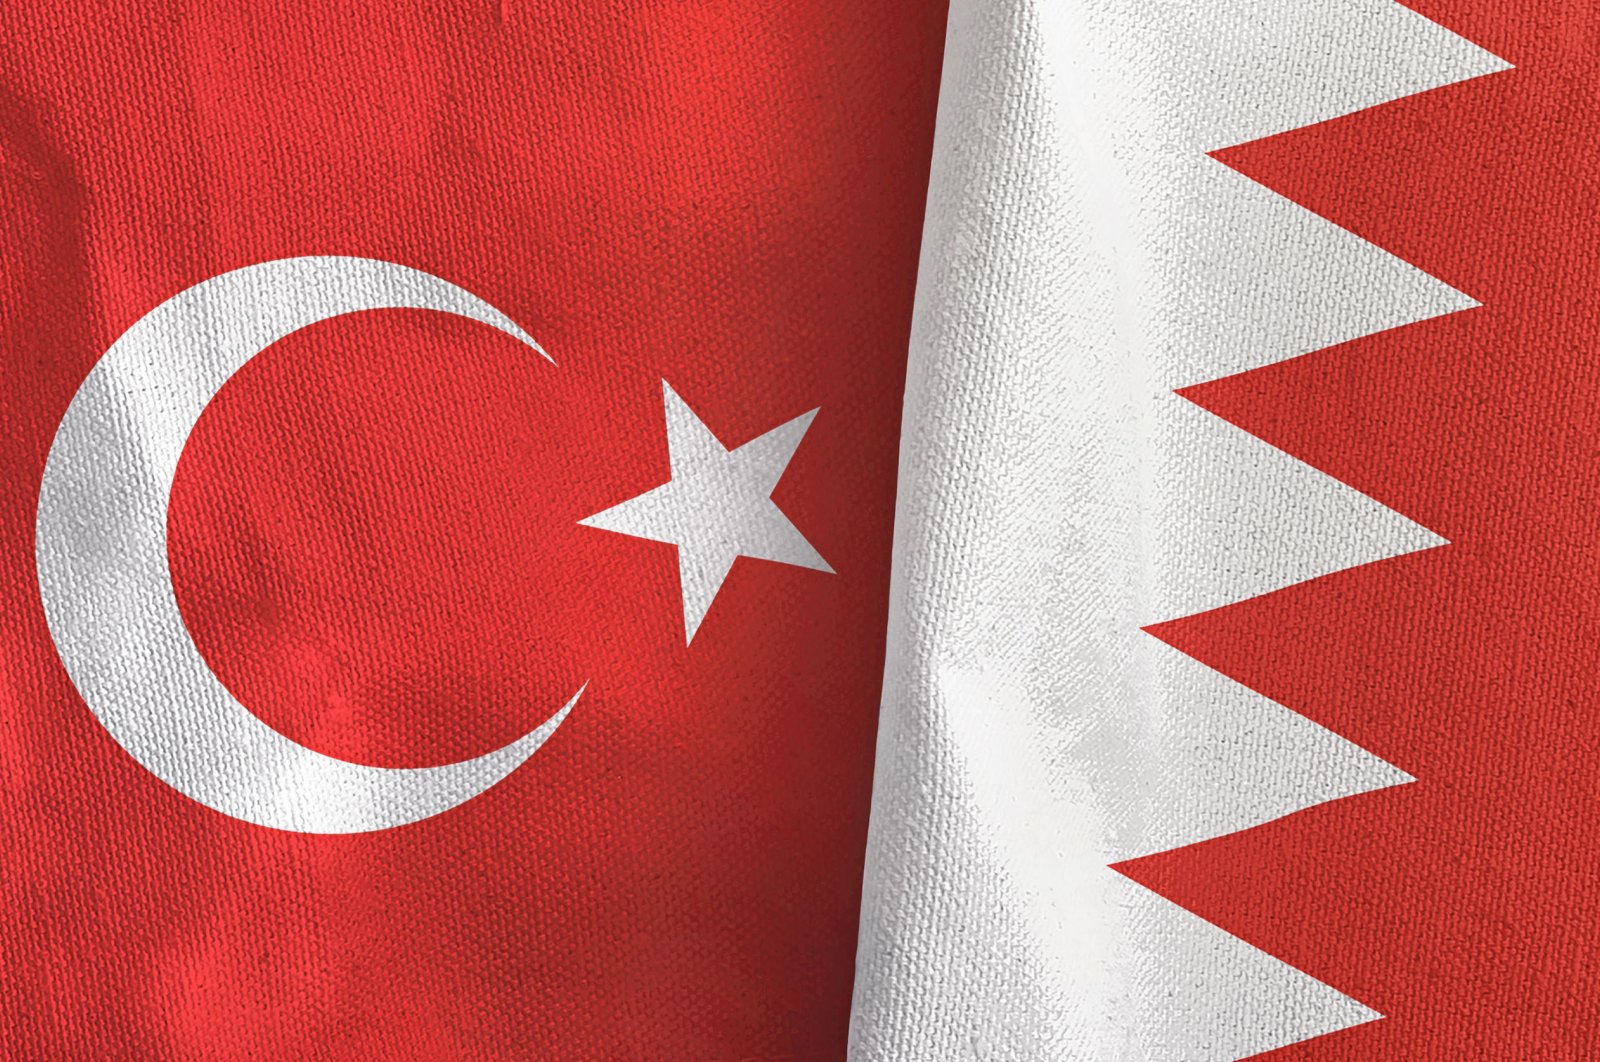 The Turkish (L) and Bahraini flags are seen together (Shutterstock)